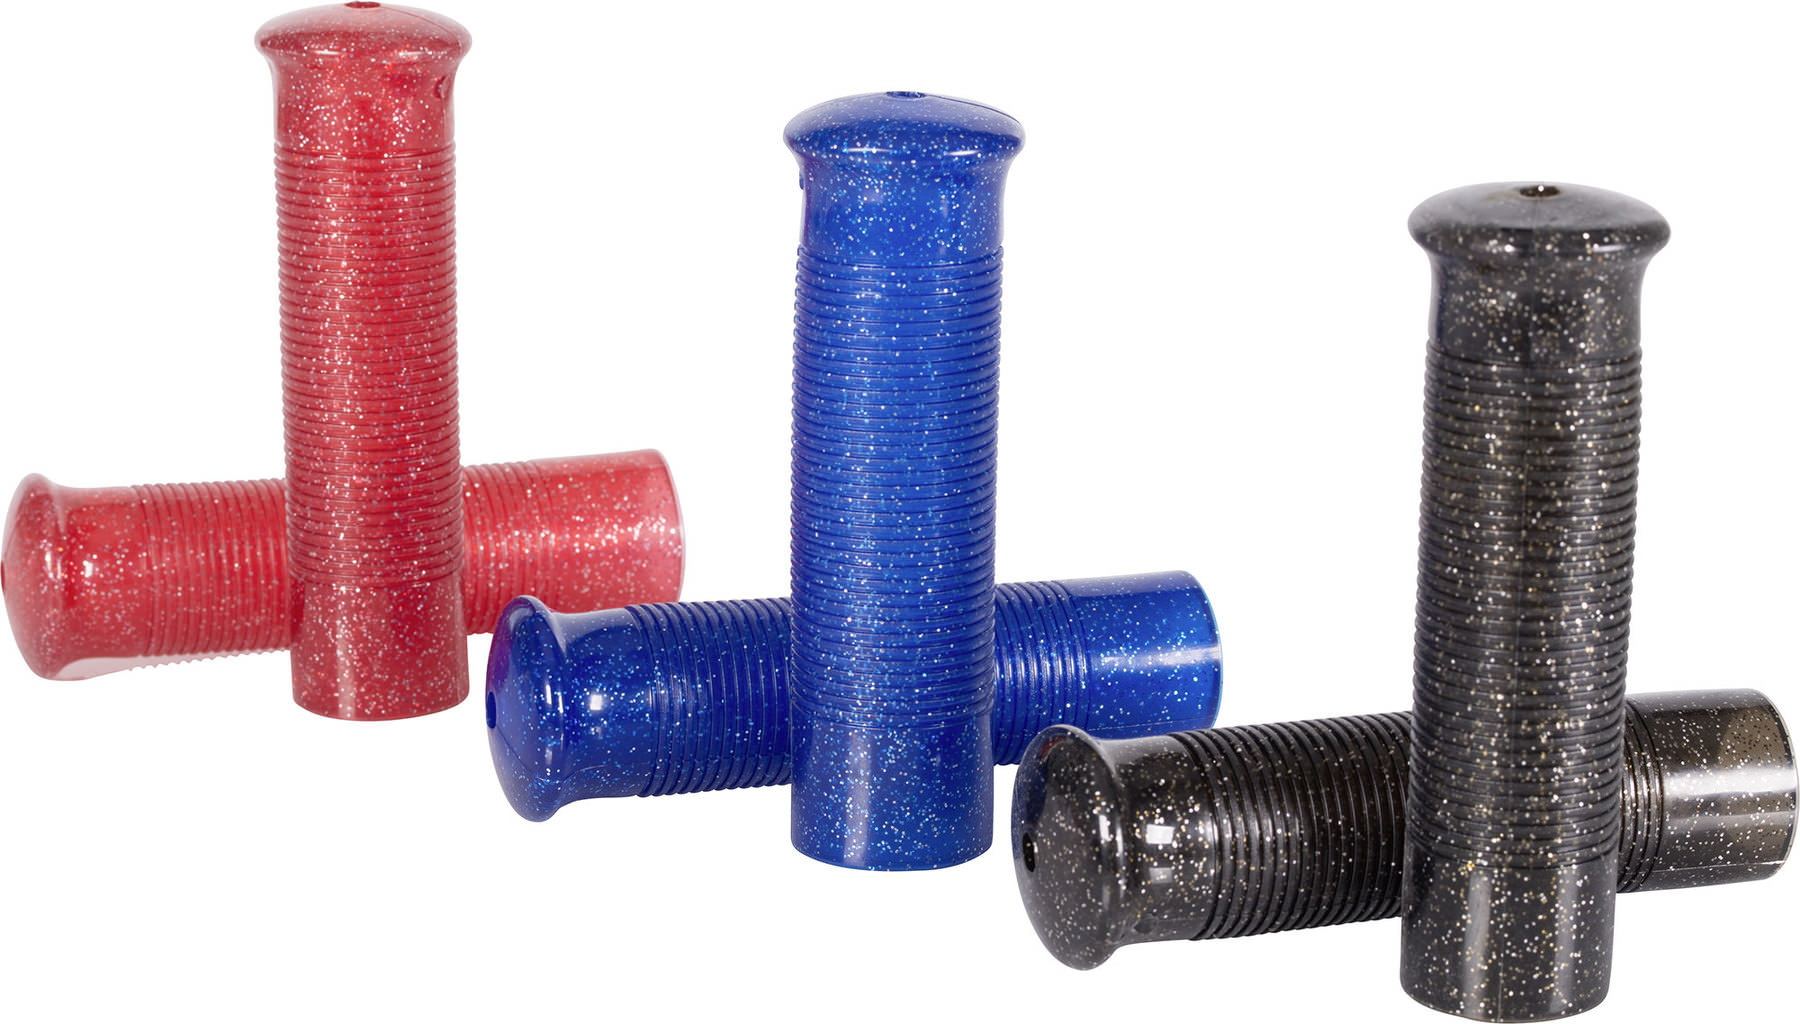 Buy Metal Flake Grips pair, 25.4 mm | Louis motorcycle clothing and technology